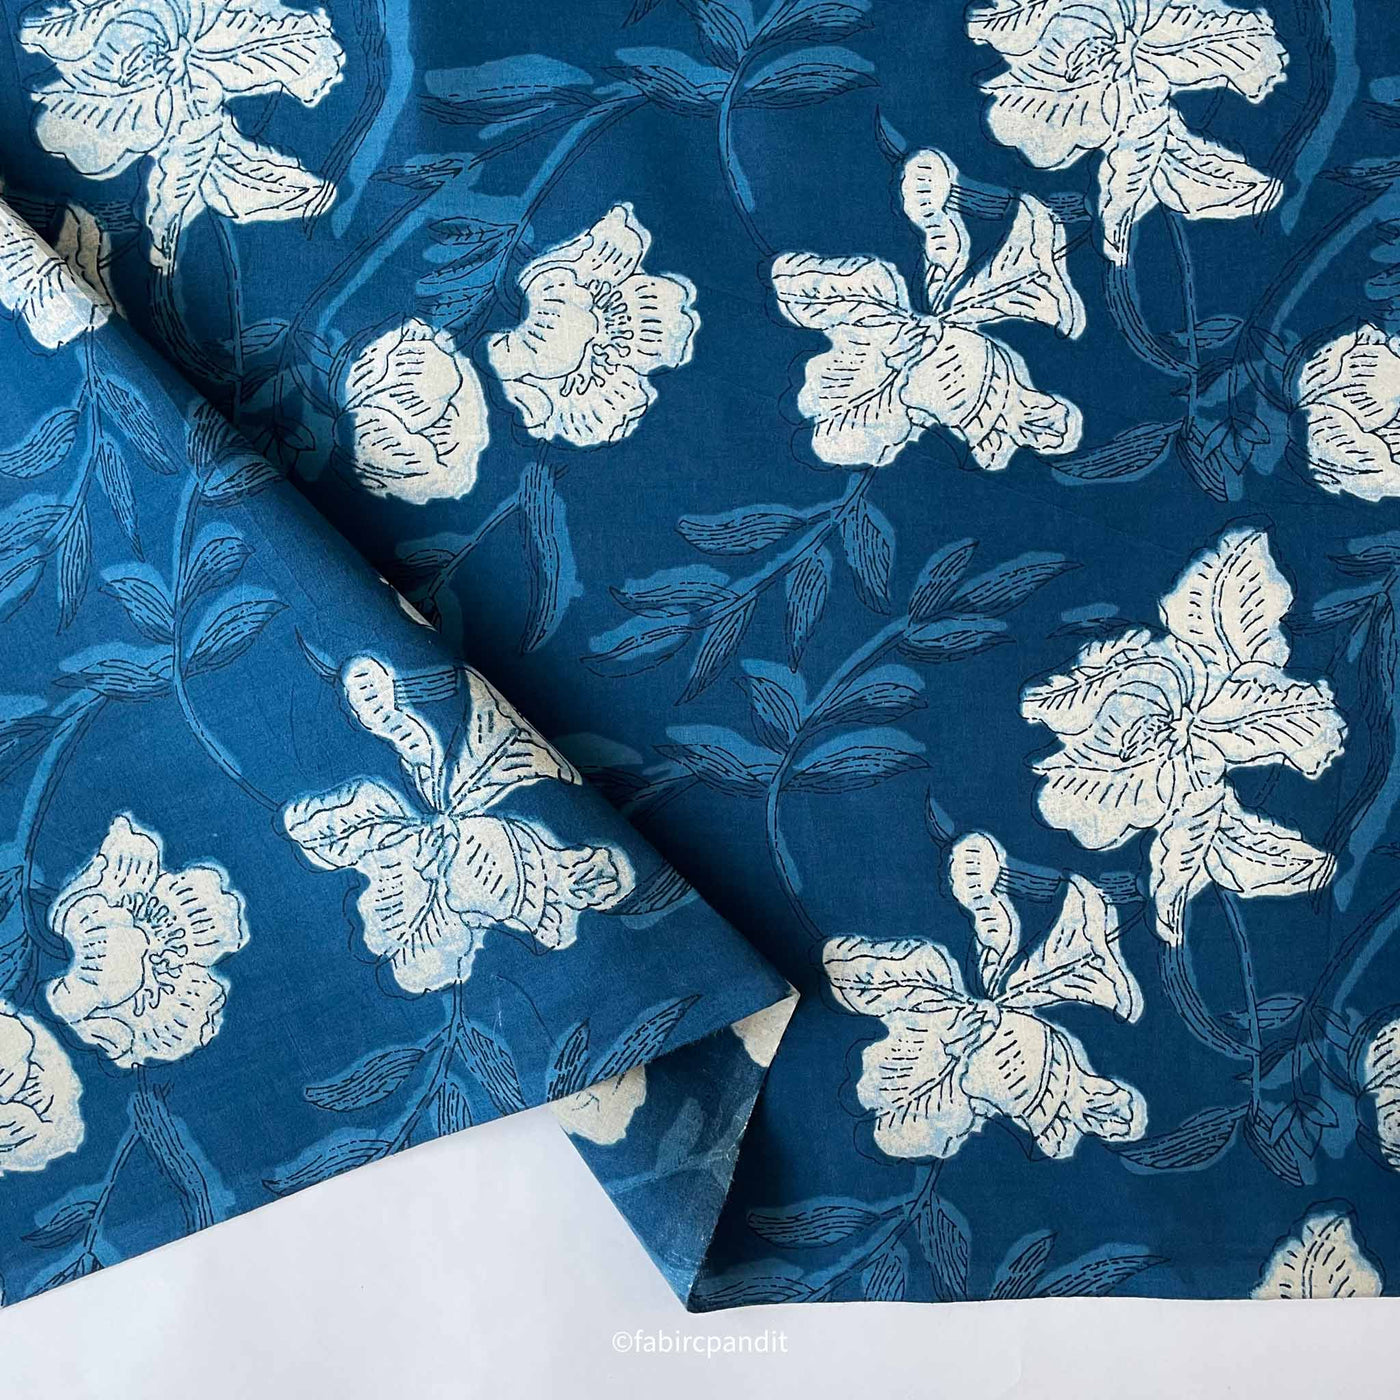 Hand Block Printed Cotton Fabric Cut Piece (CUT PIECE) Indigo Blue and White Abstract Floral Hand Block Printed Pure Cotton Fabric (Width 43 inches)